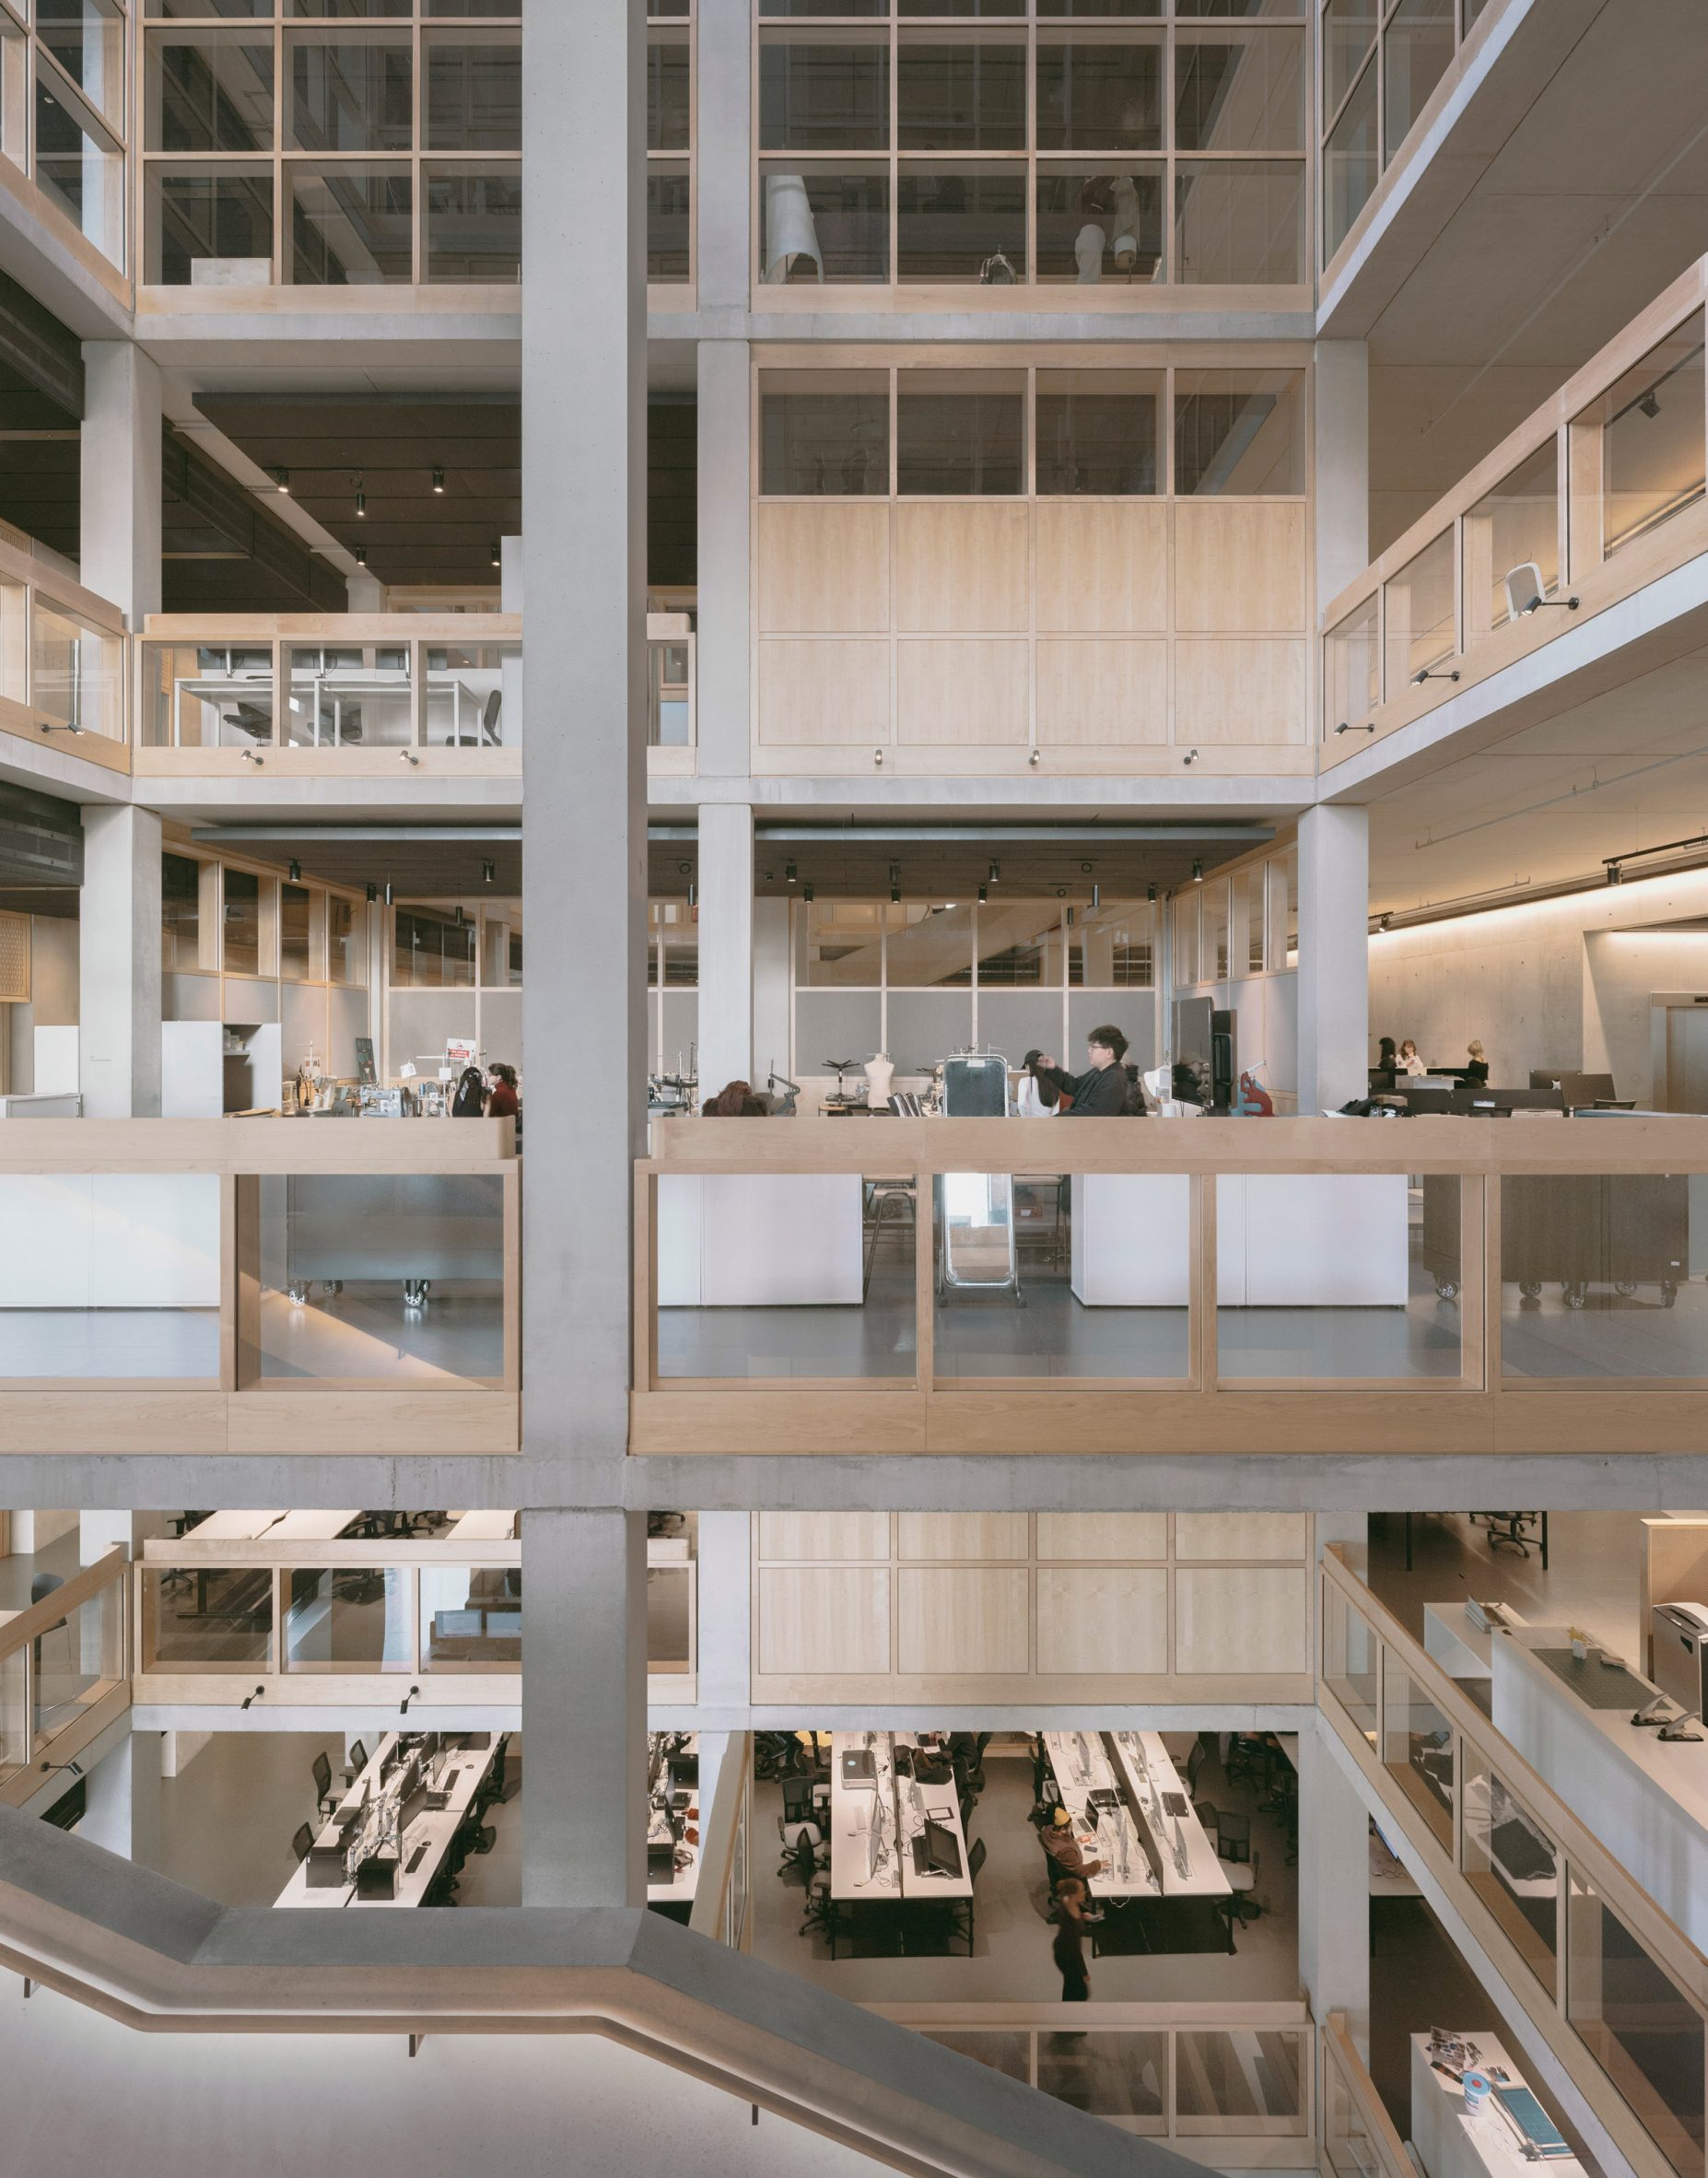 View of interior spaces at university campus by Allies and Morrison